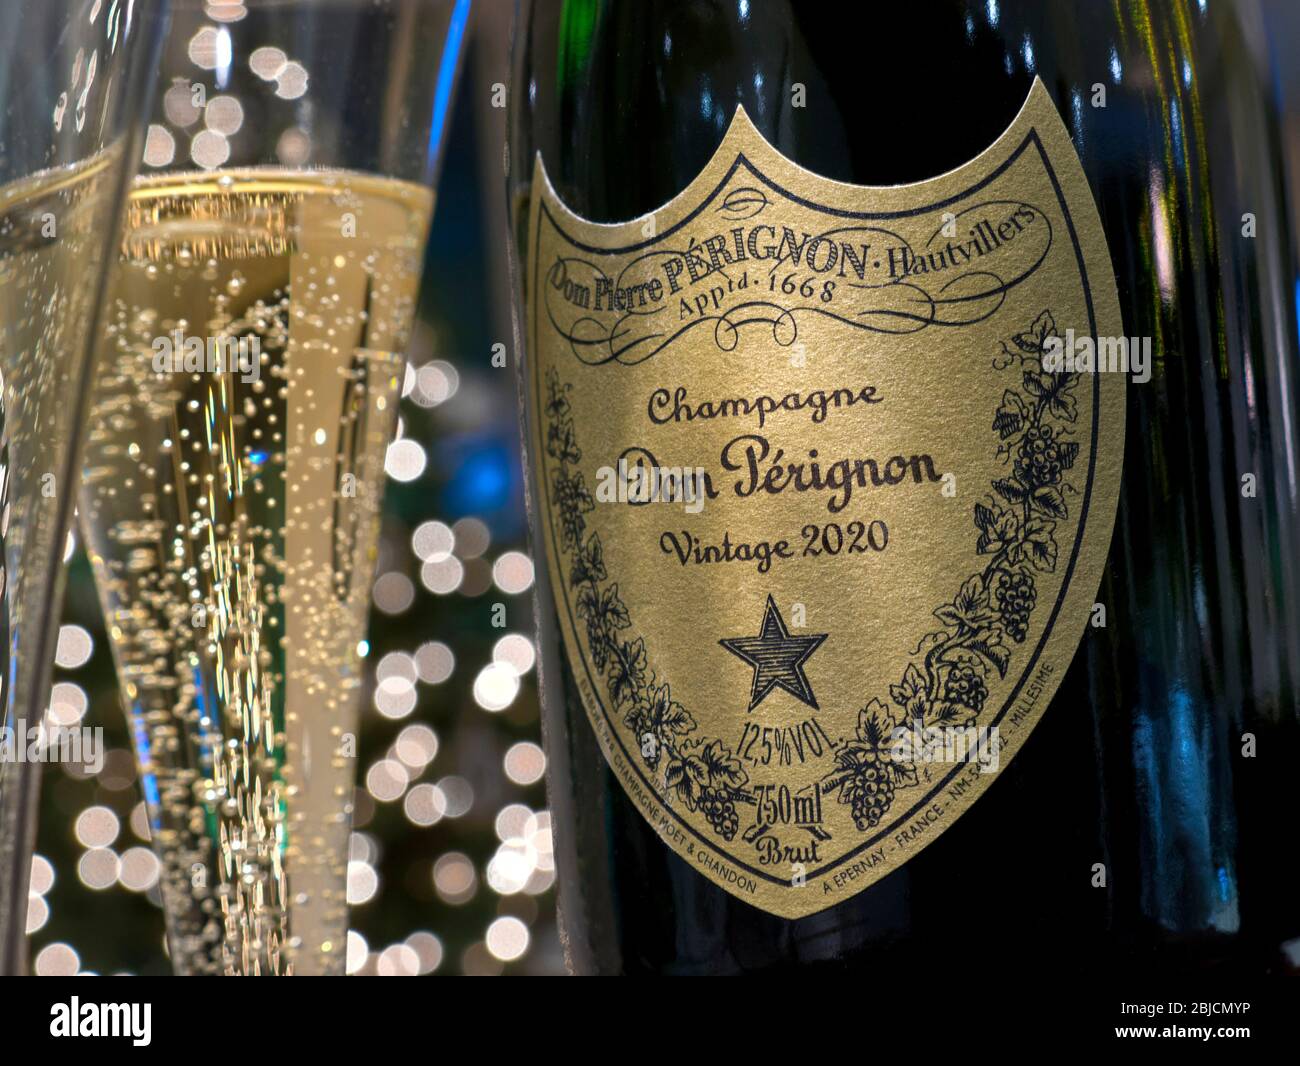 Dom Perignon Champagne bottle and poured glass of champagne in party atmosphere with sparkling lights in background Concept label post-dated to 2020 Stock Photo